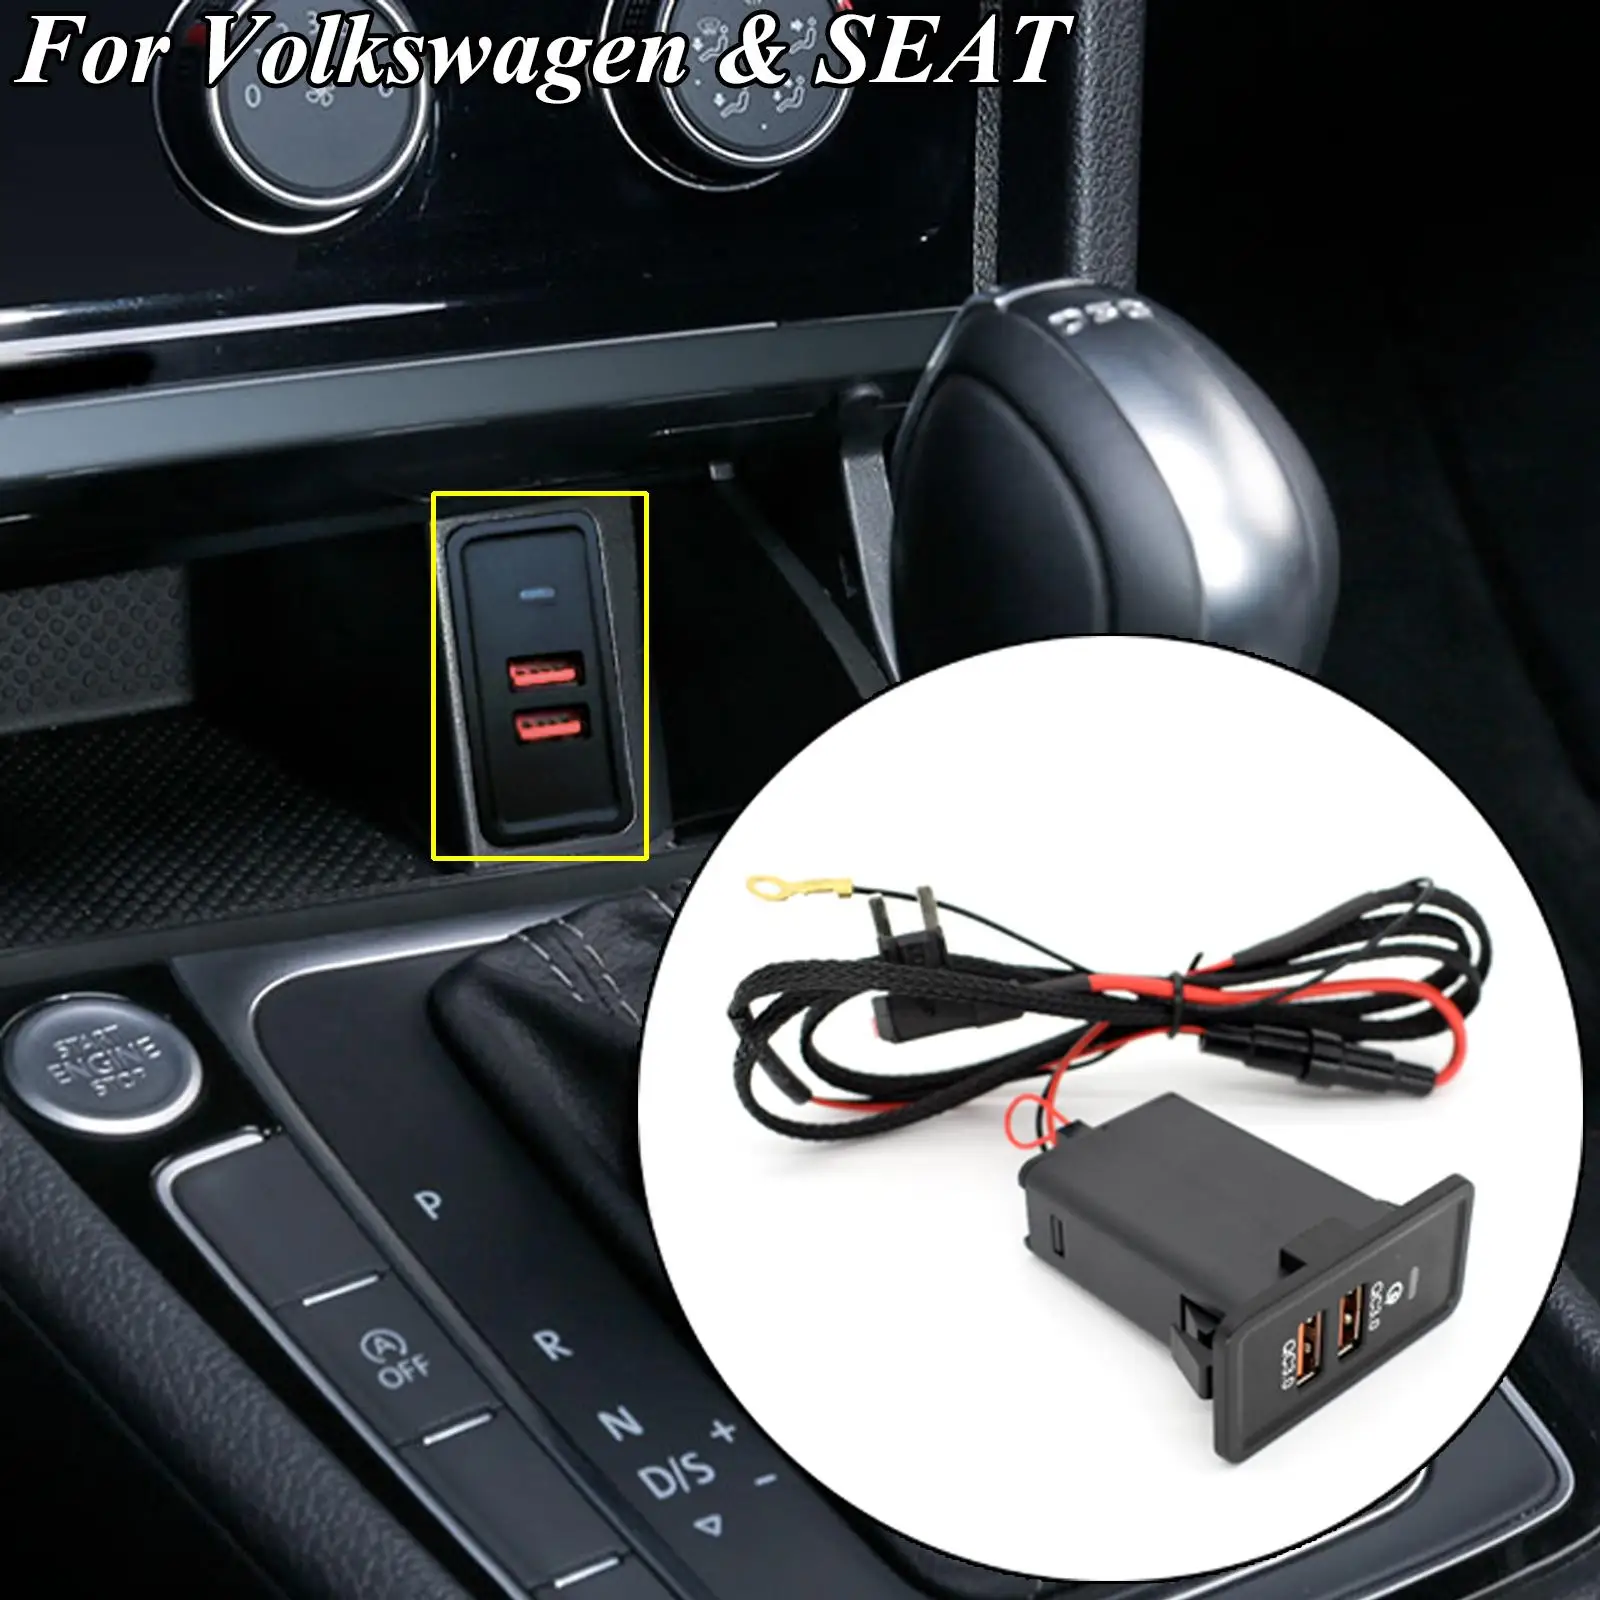 For VW Golf Passat Jetta Sharan For SEAT Ibiza Leon Car Charger Dual USB Ports QC3.0 Phone Watch MP3 MP4 Fast Charging Adpater